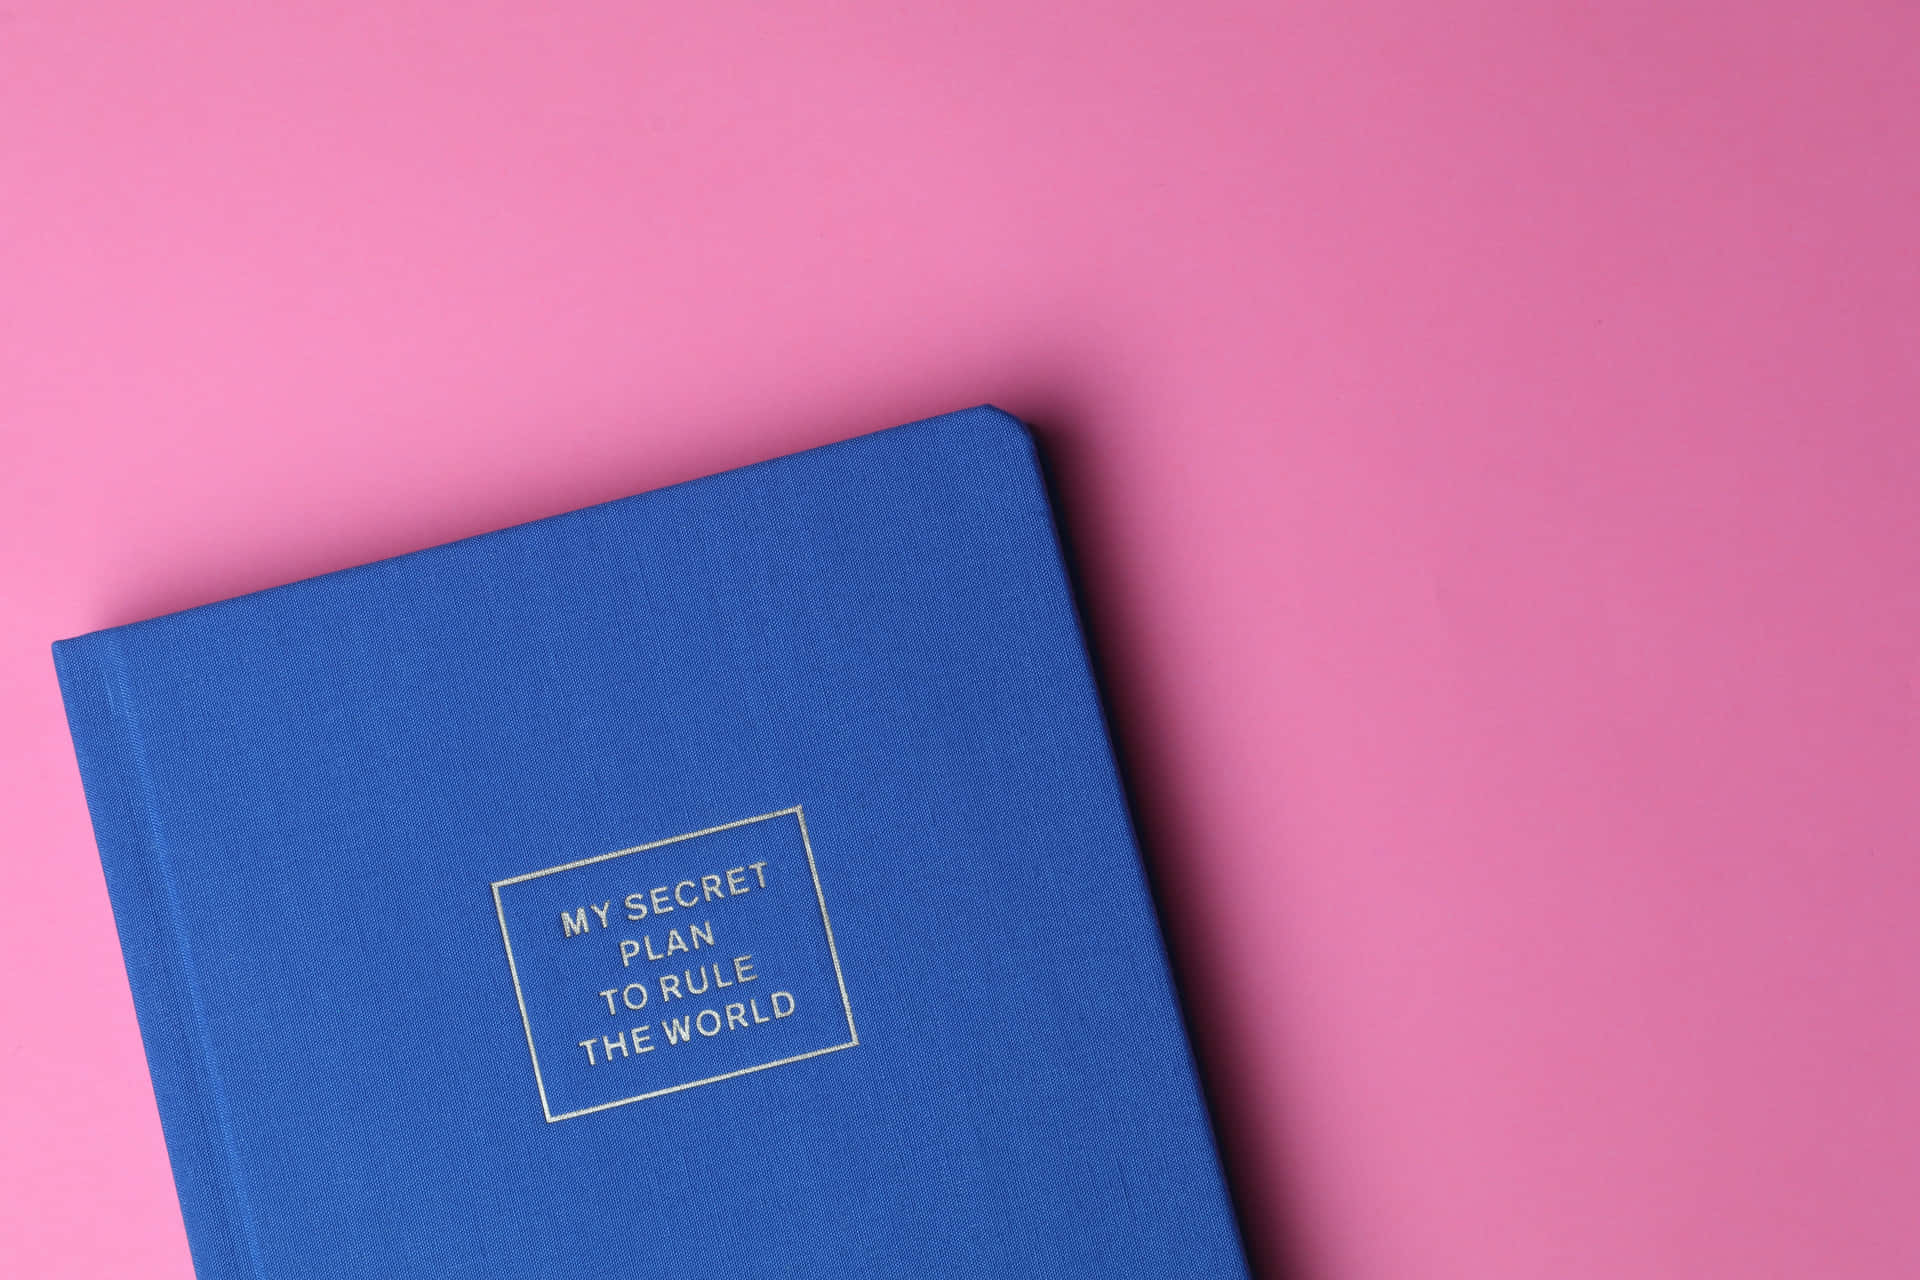 Blue Book On Pink Surface Picture